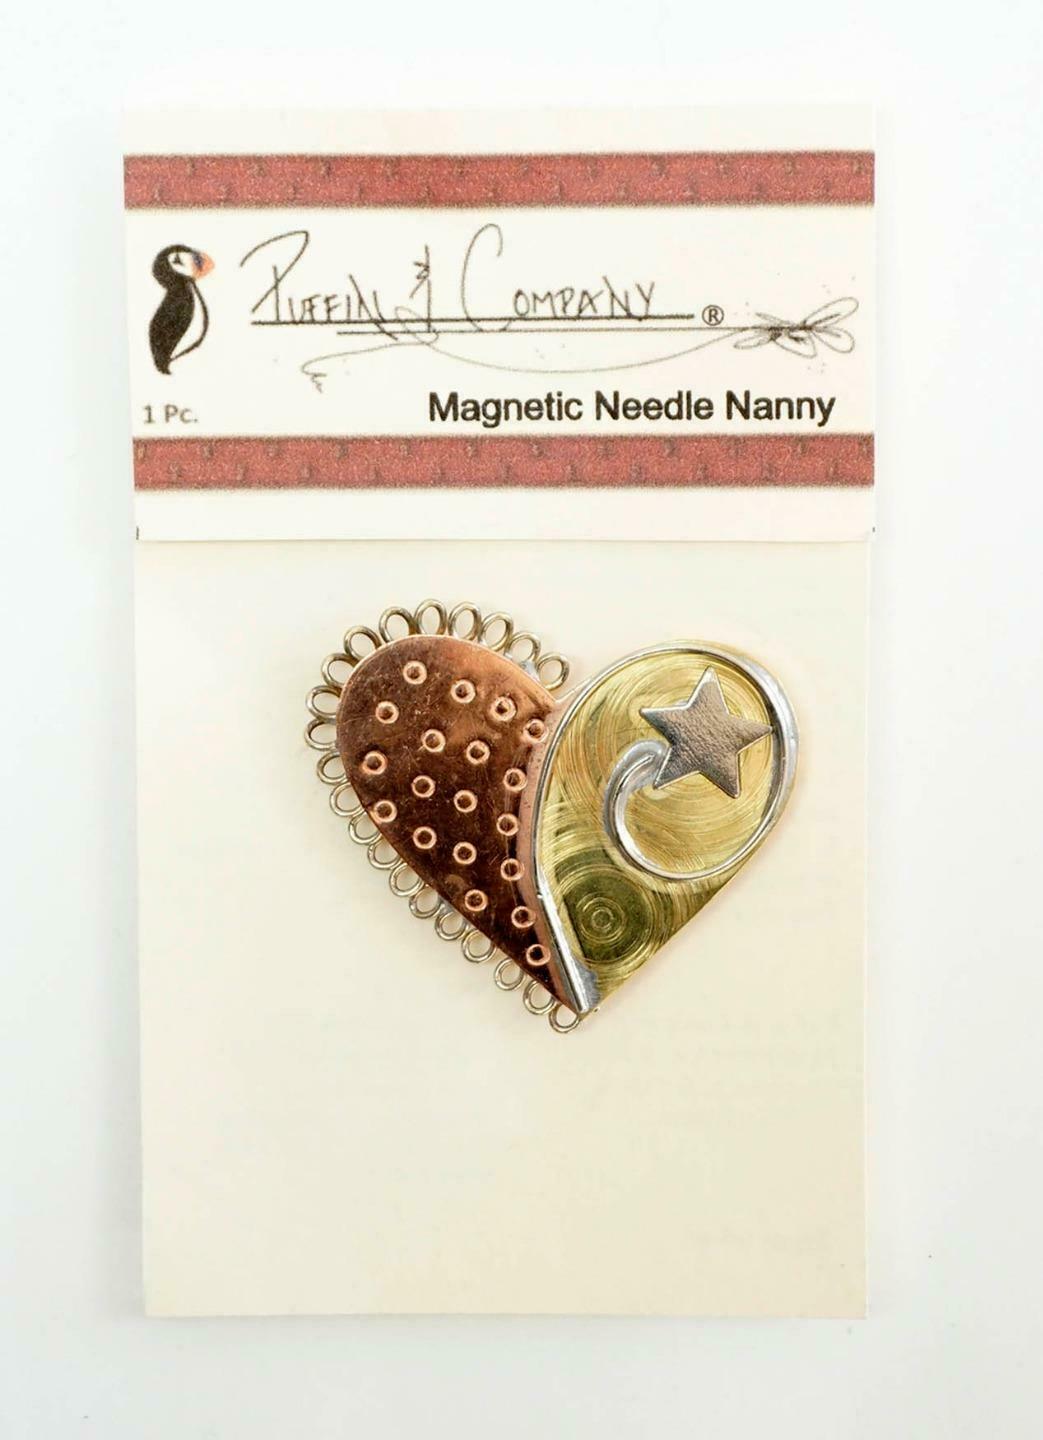 Metal Multi-color Heart Magnet Needle Nanny For Storage Of Needles By Puffin